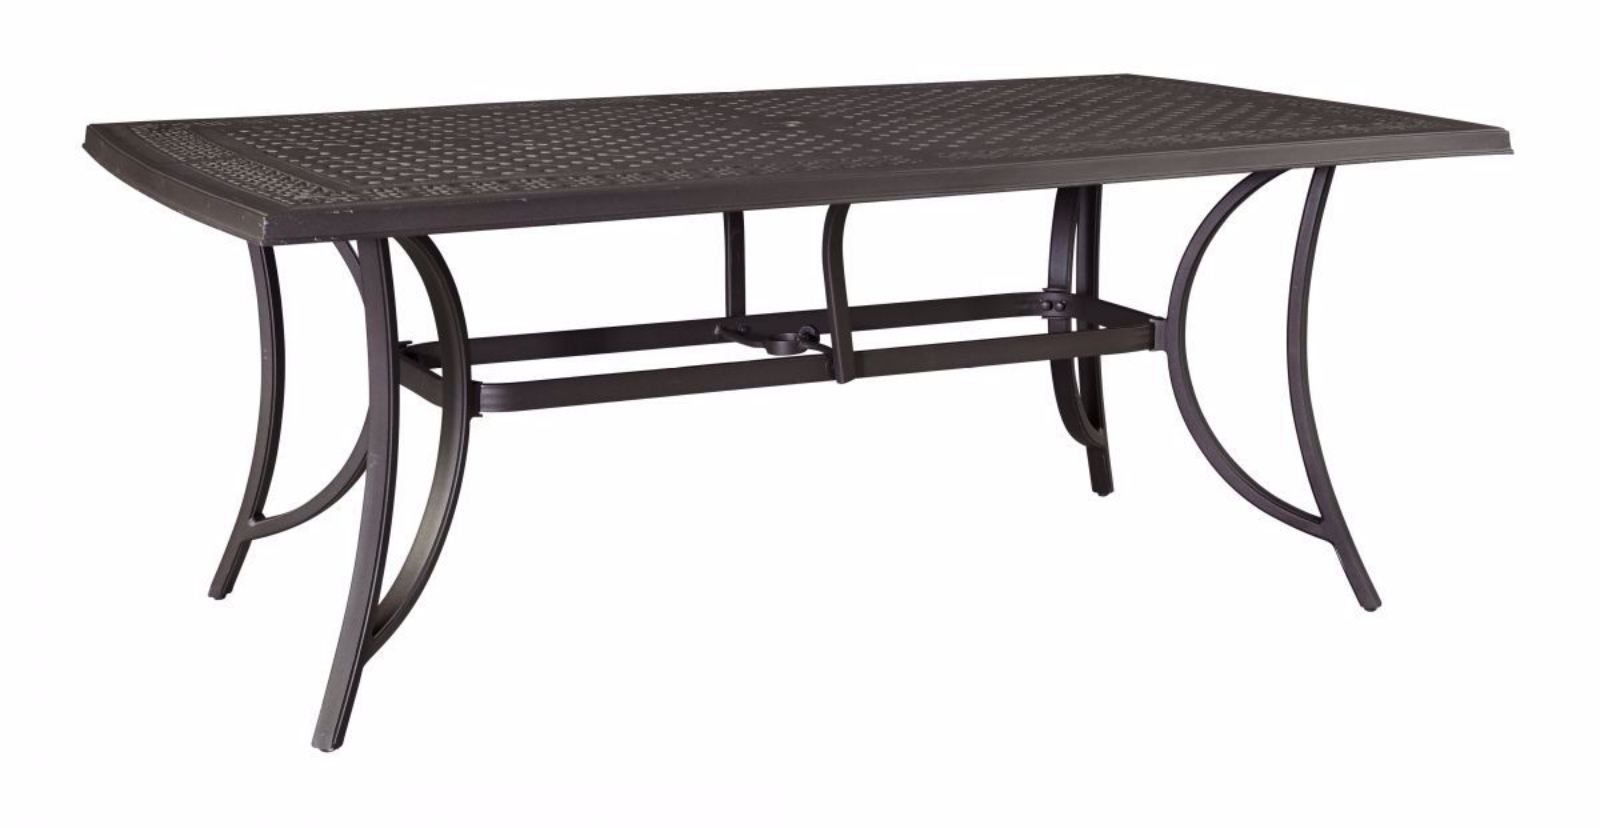 Picture of Burnella Patio Dining Table